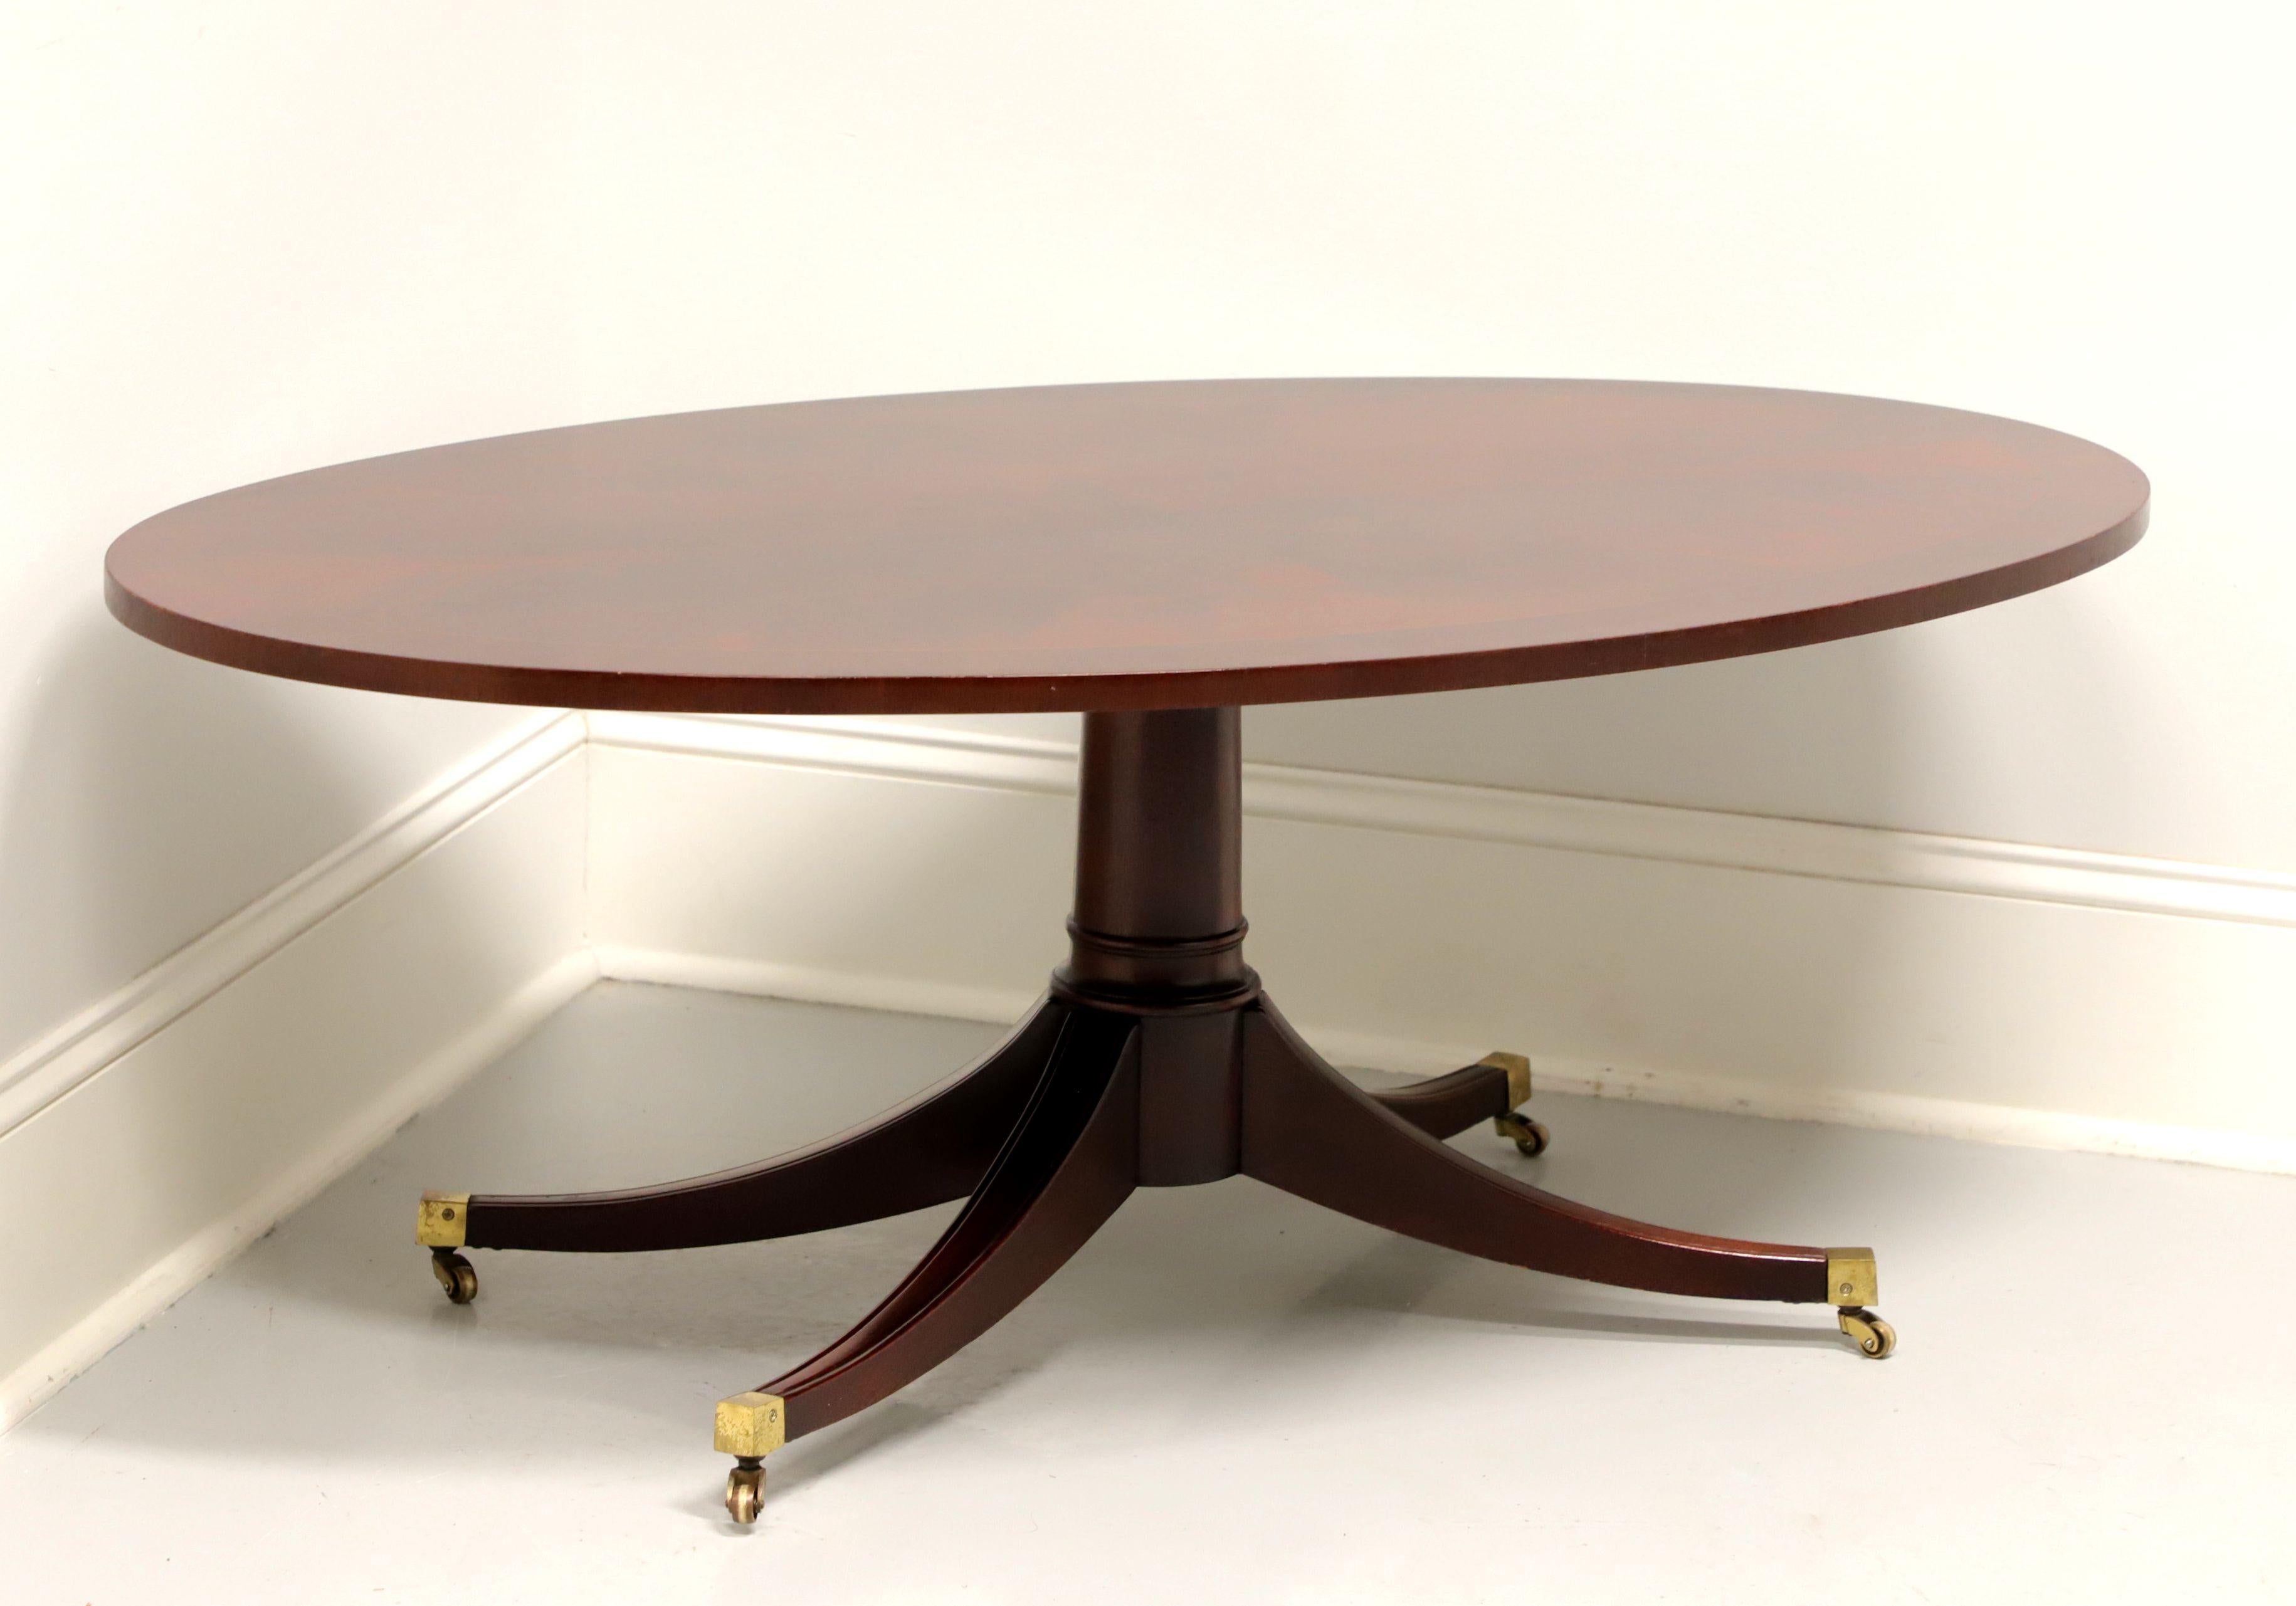 A vintage Georgian style oval coffee table, unbranded, similar quality to Councill or Hickory Chair. Solid mahogany with banded flame mahogany top, round single pedestal base with four curved legs and brass toe caps with brass casters. Made in the